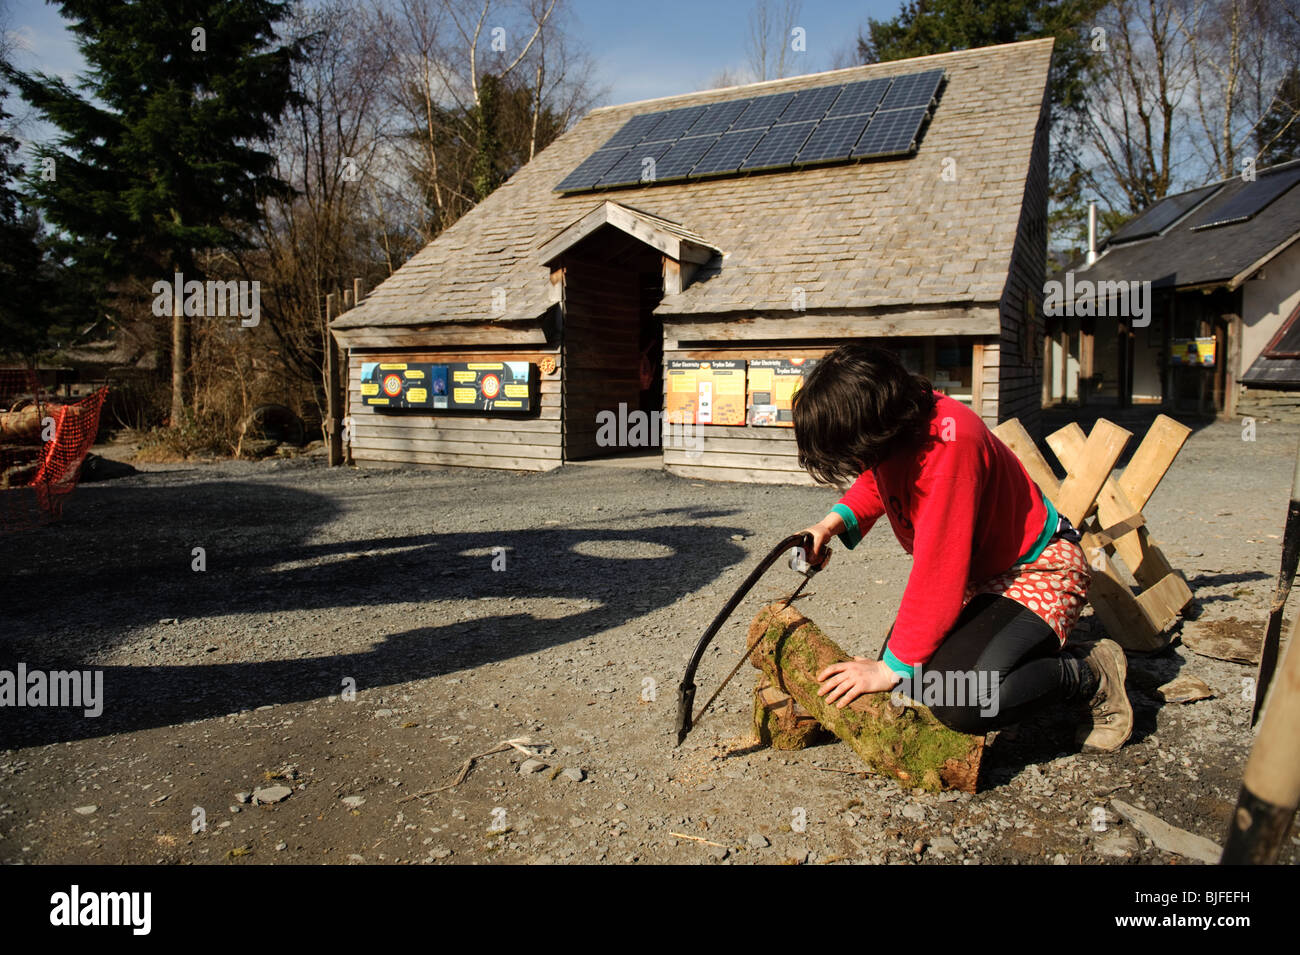 A woman volunteer sawing wood at CAT - The Centre for Alternative Technology, near Machynlleth, north Wales UK Stock Photo